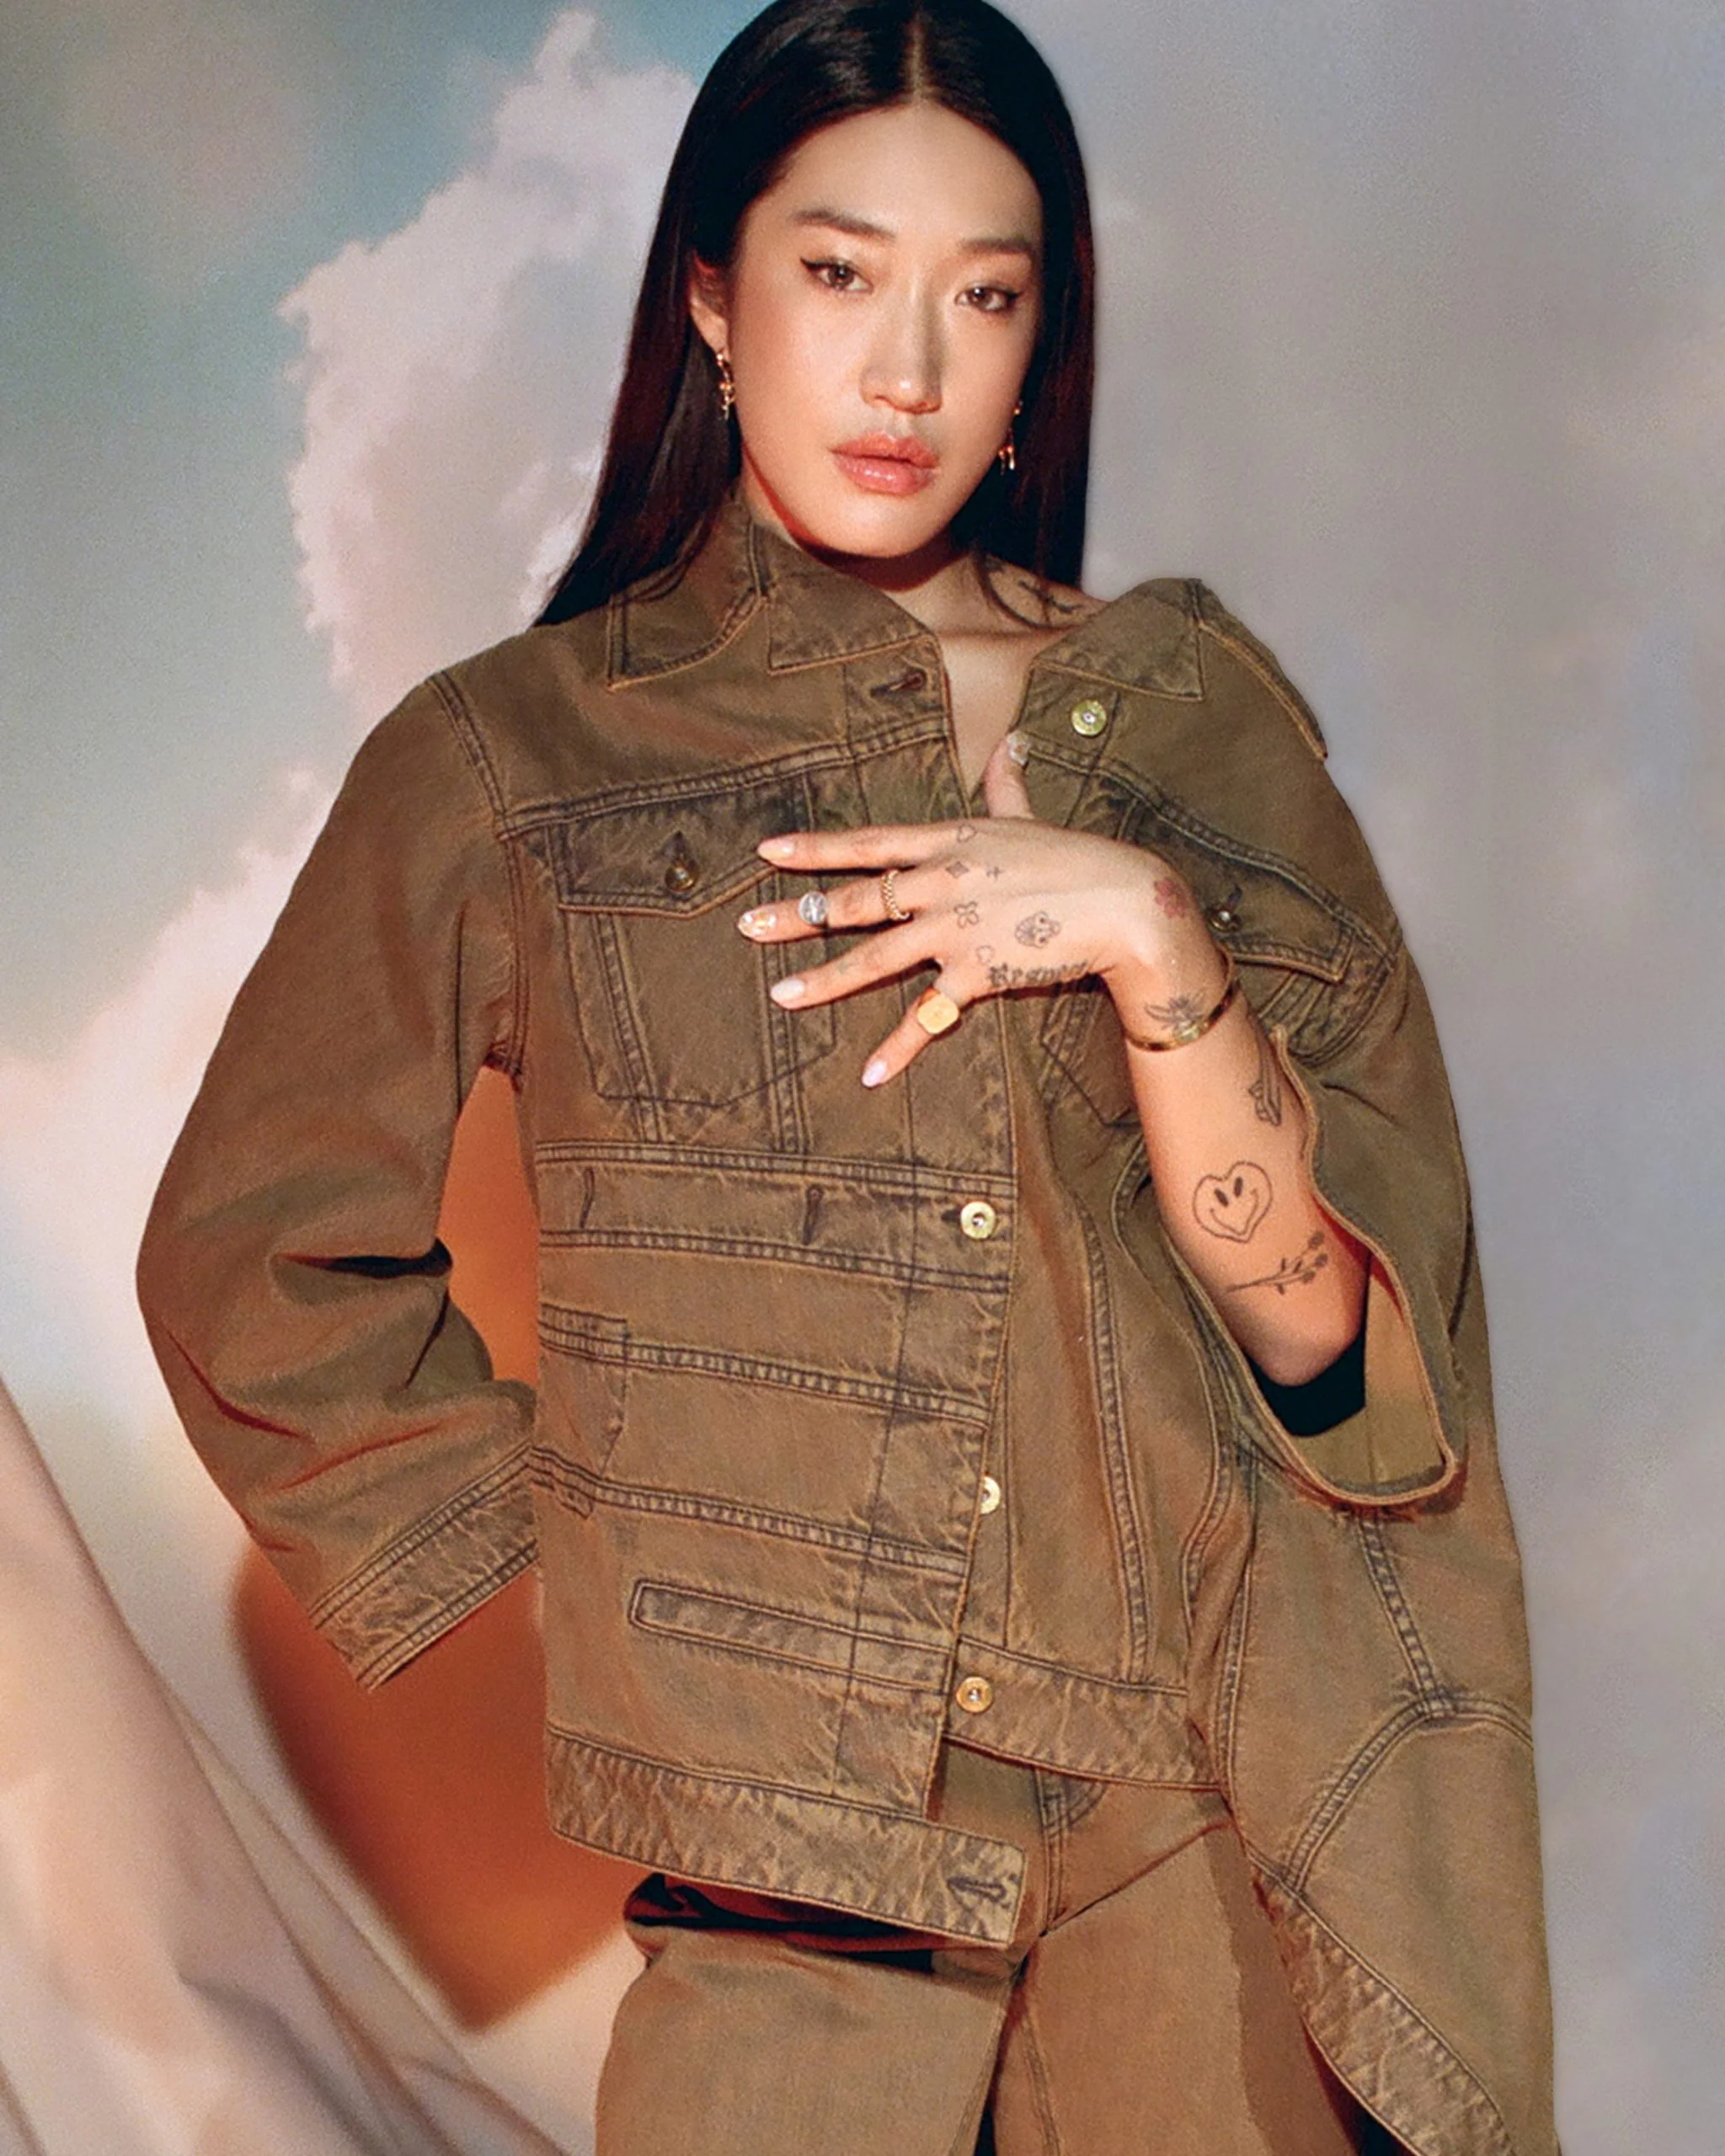 Peggy Gou Curates All-Women Lineup for Italian Tour